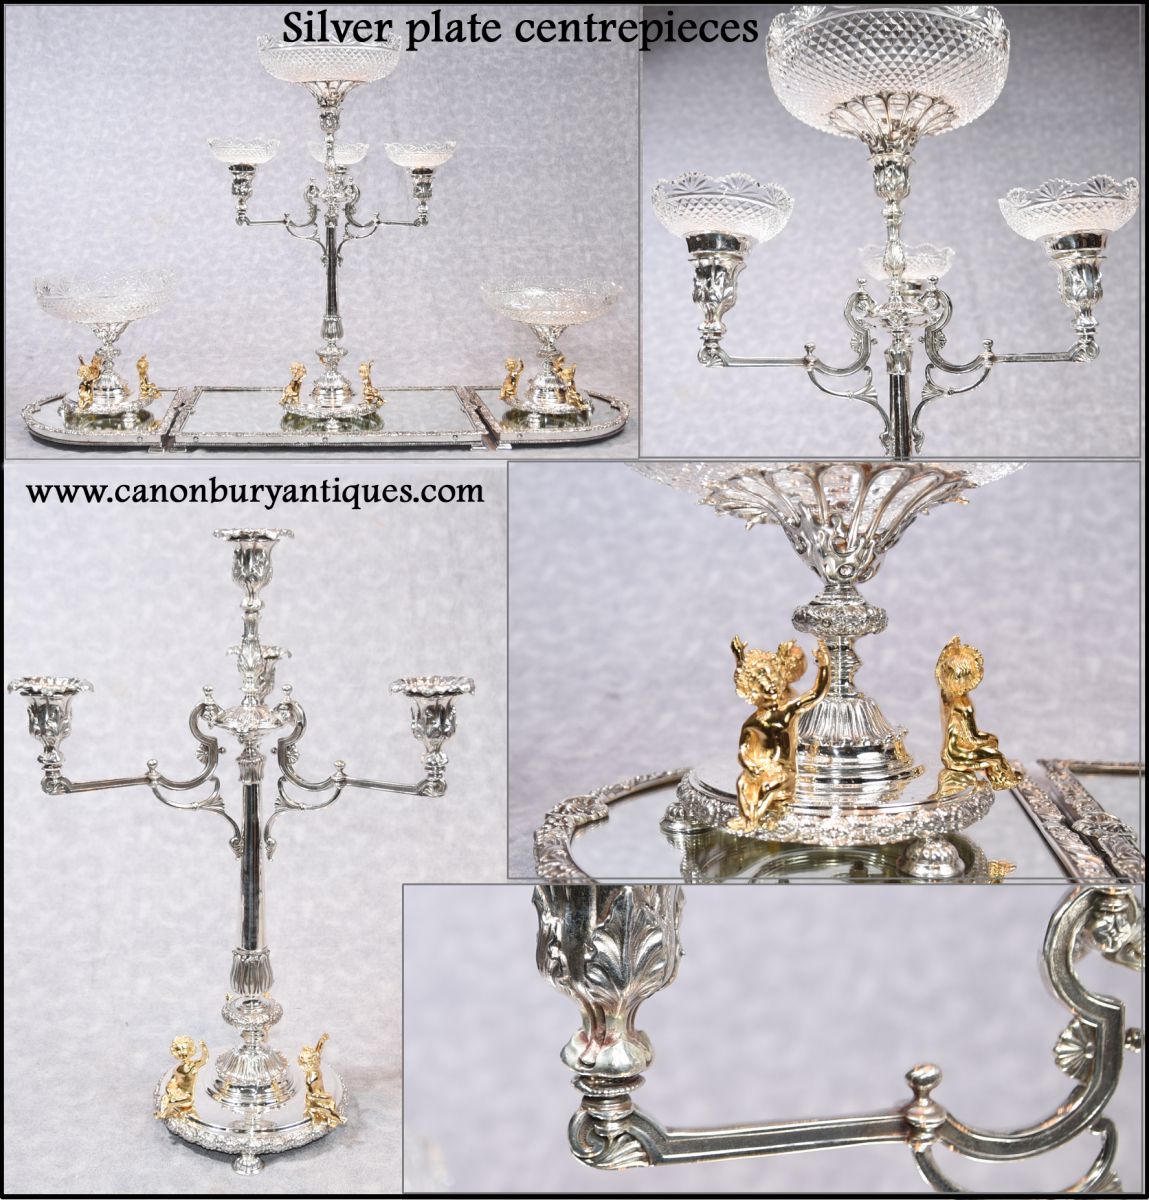 Large range of silver plate centrepieces